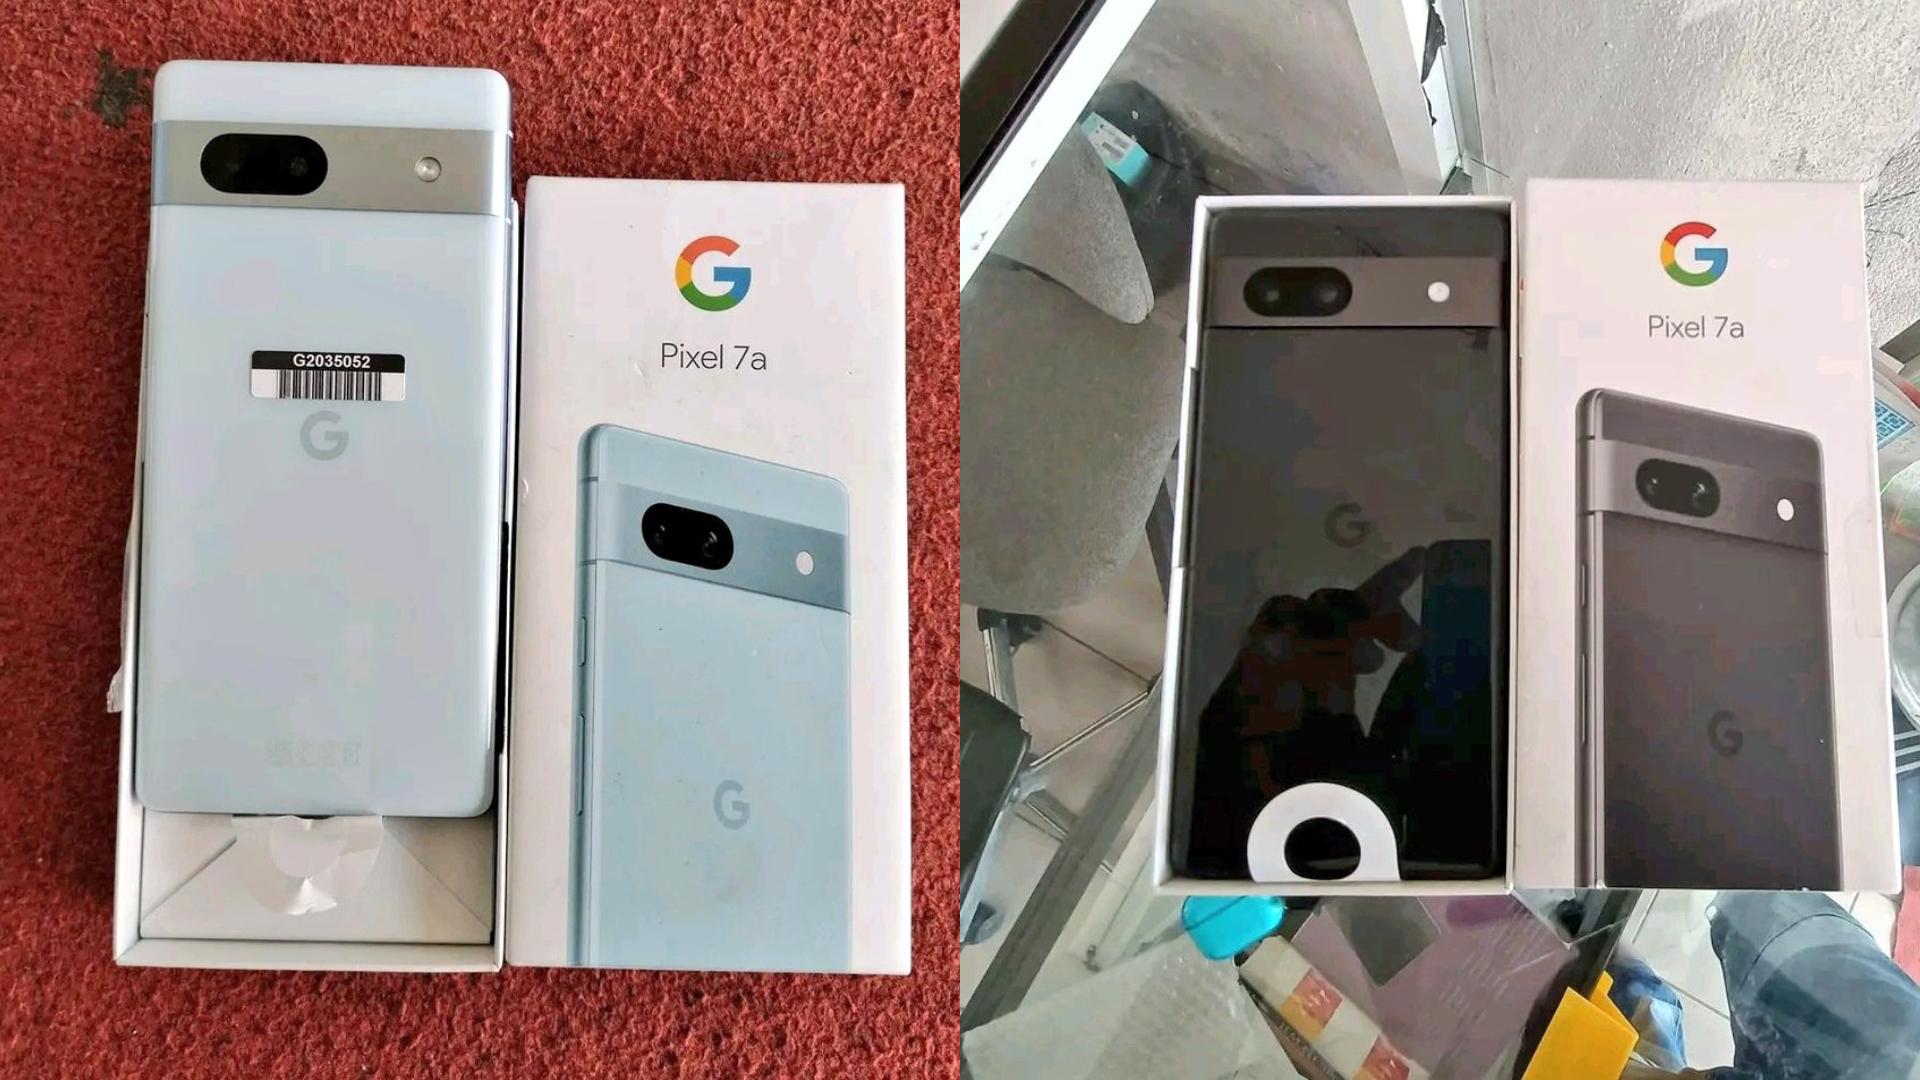 Google Pixel 7A Full Specs and HD image leaked